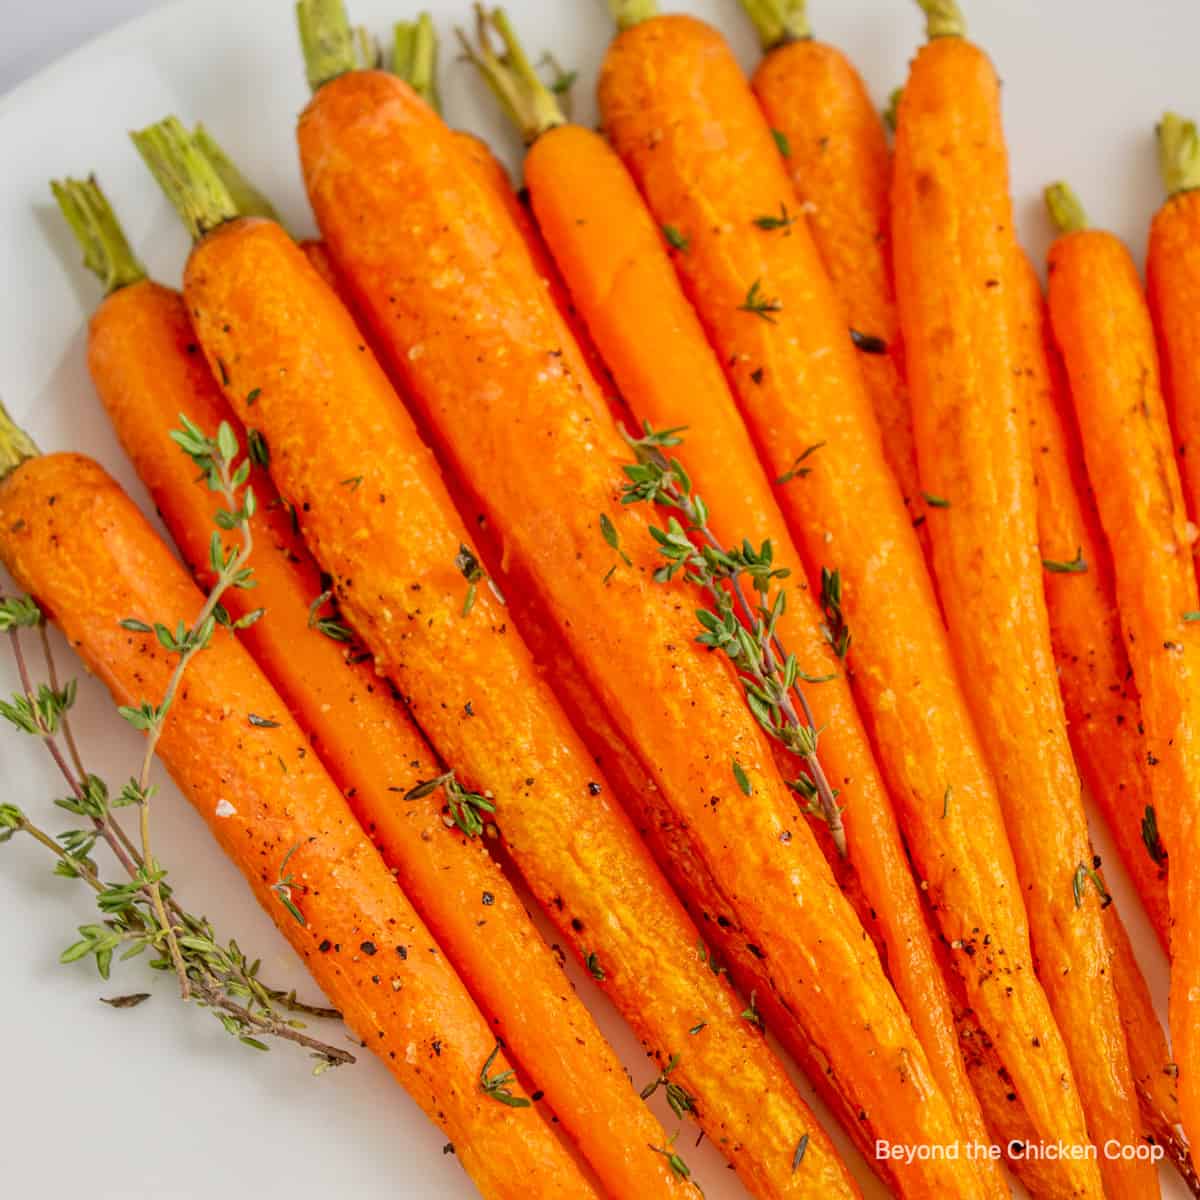 Baby carrots topped with fresh herbs.